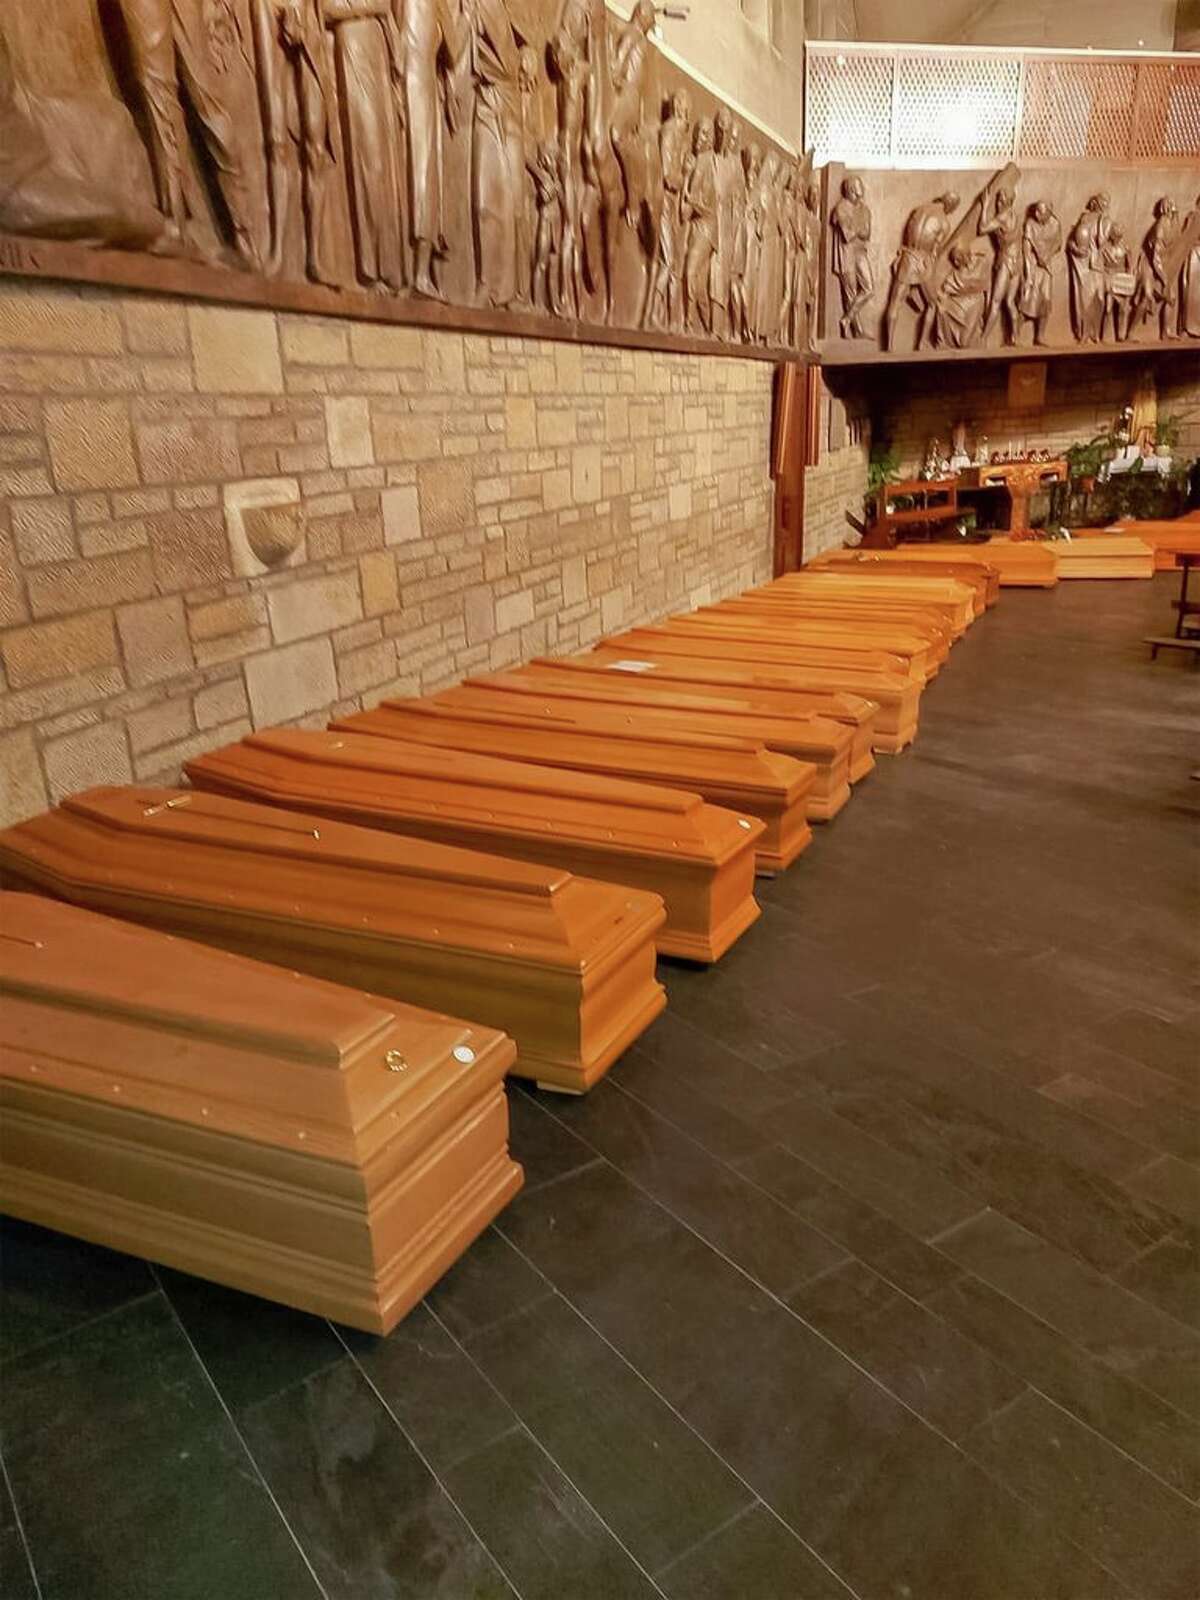 This photo provided by Italian news agency ANSA on March 19, 2020 shows coffins aligned in a chapel in Bergamo, Lombardy on March 18, 2020 prior to being transported for cremation.